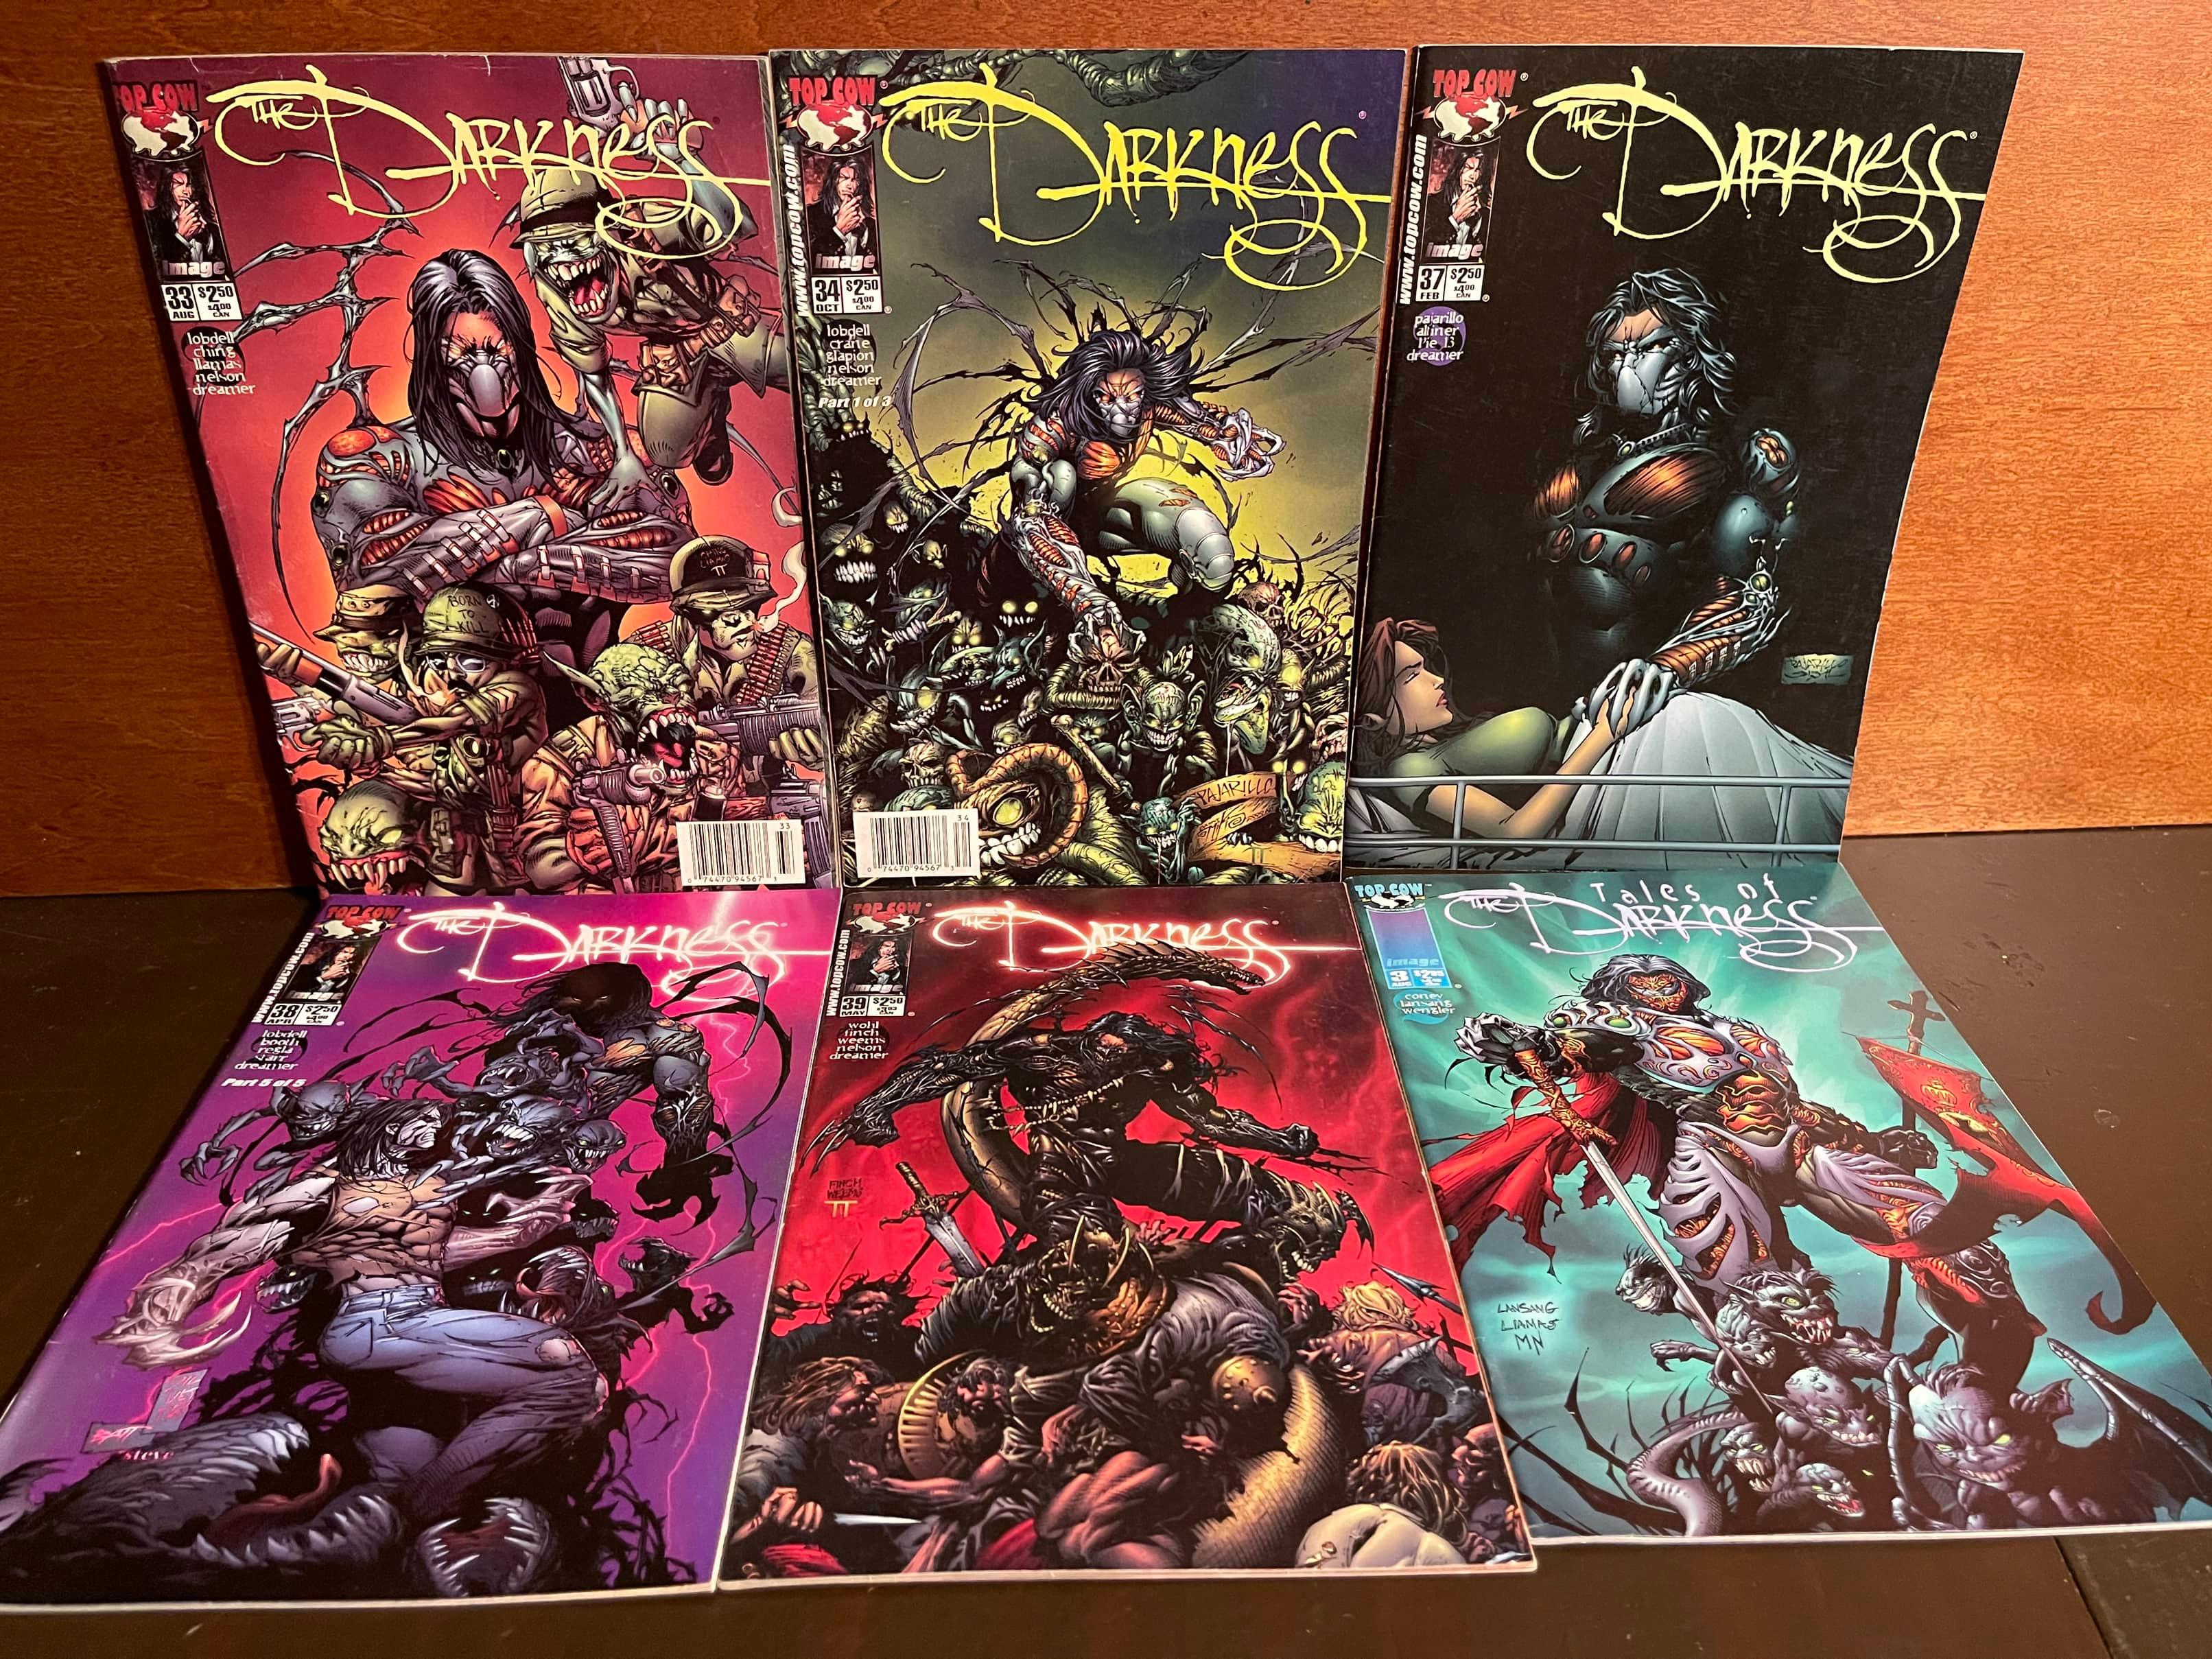 6 Issues The Darkness #33 #34 #37 #38 #39 Tales of the Darkness #3 Top Cow Comics